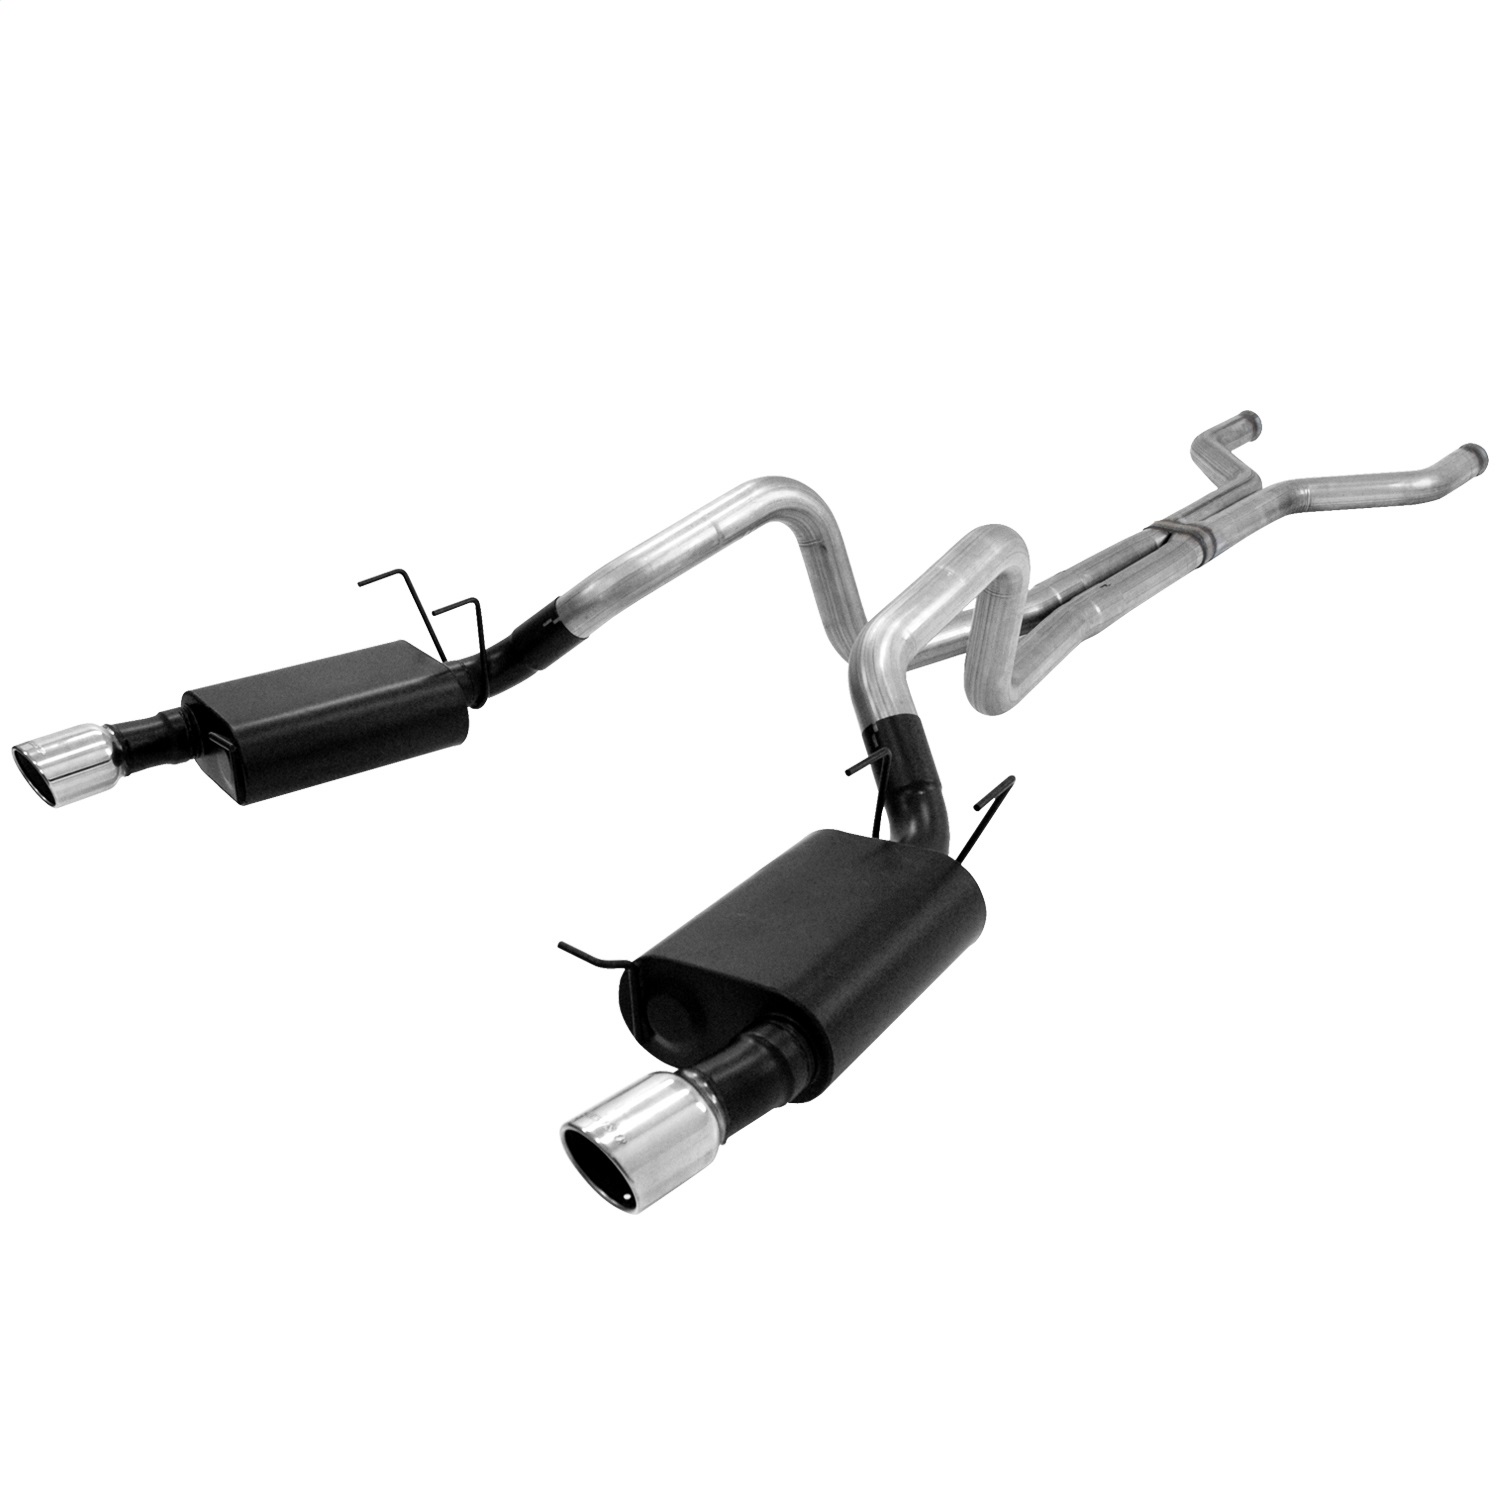 Flowmaster Flowmaster 817587 American Thunder Cat Back Exhaust System Fits 13-14 Mustang